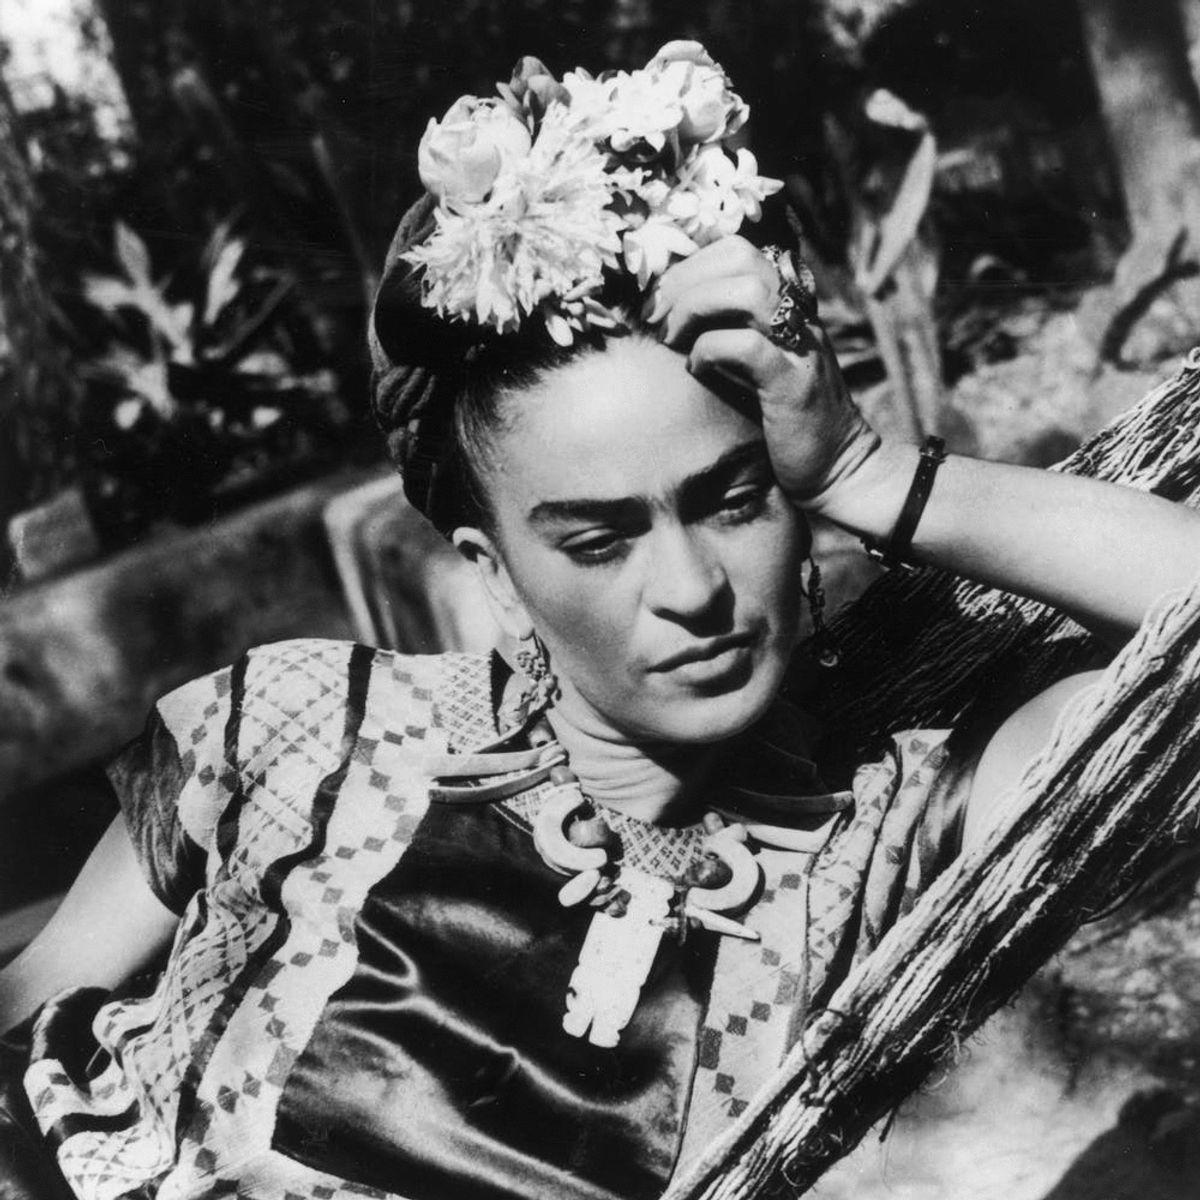 7 Ways to Live Fearlessly According to Frida Kahlo